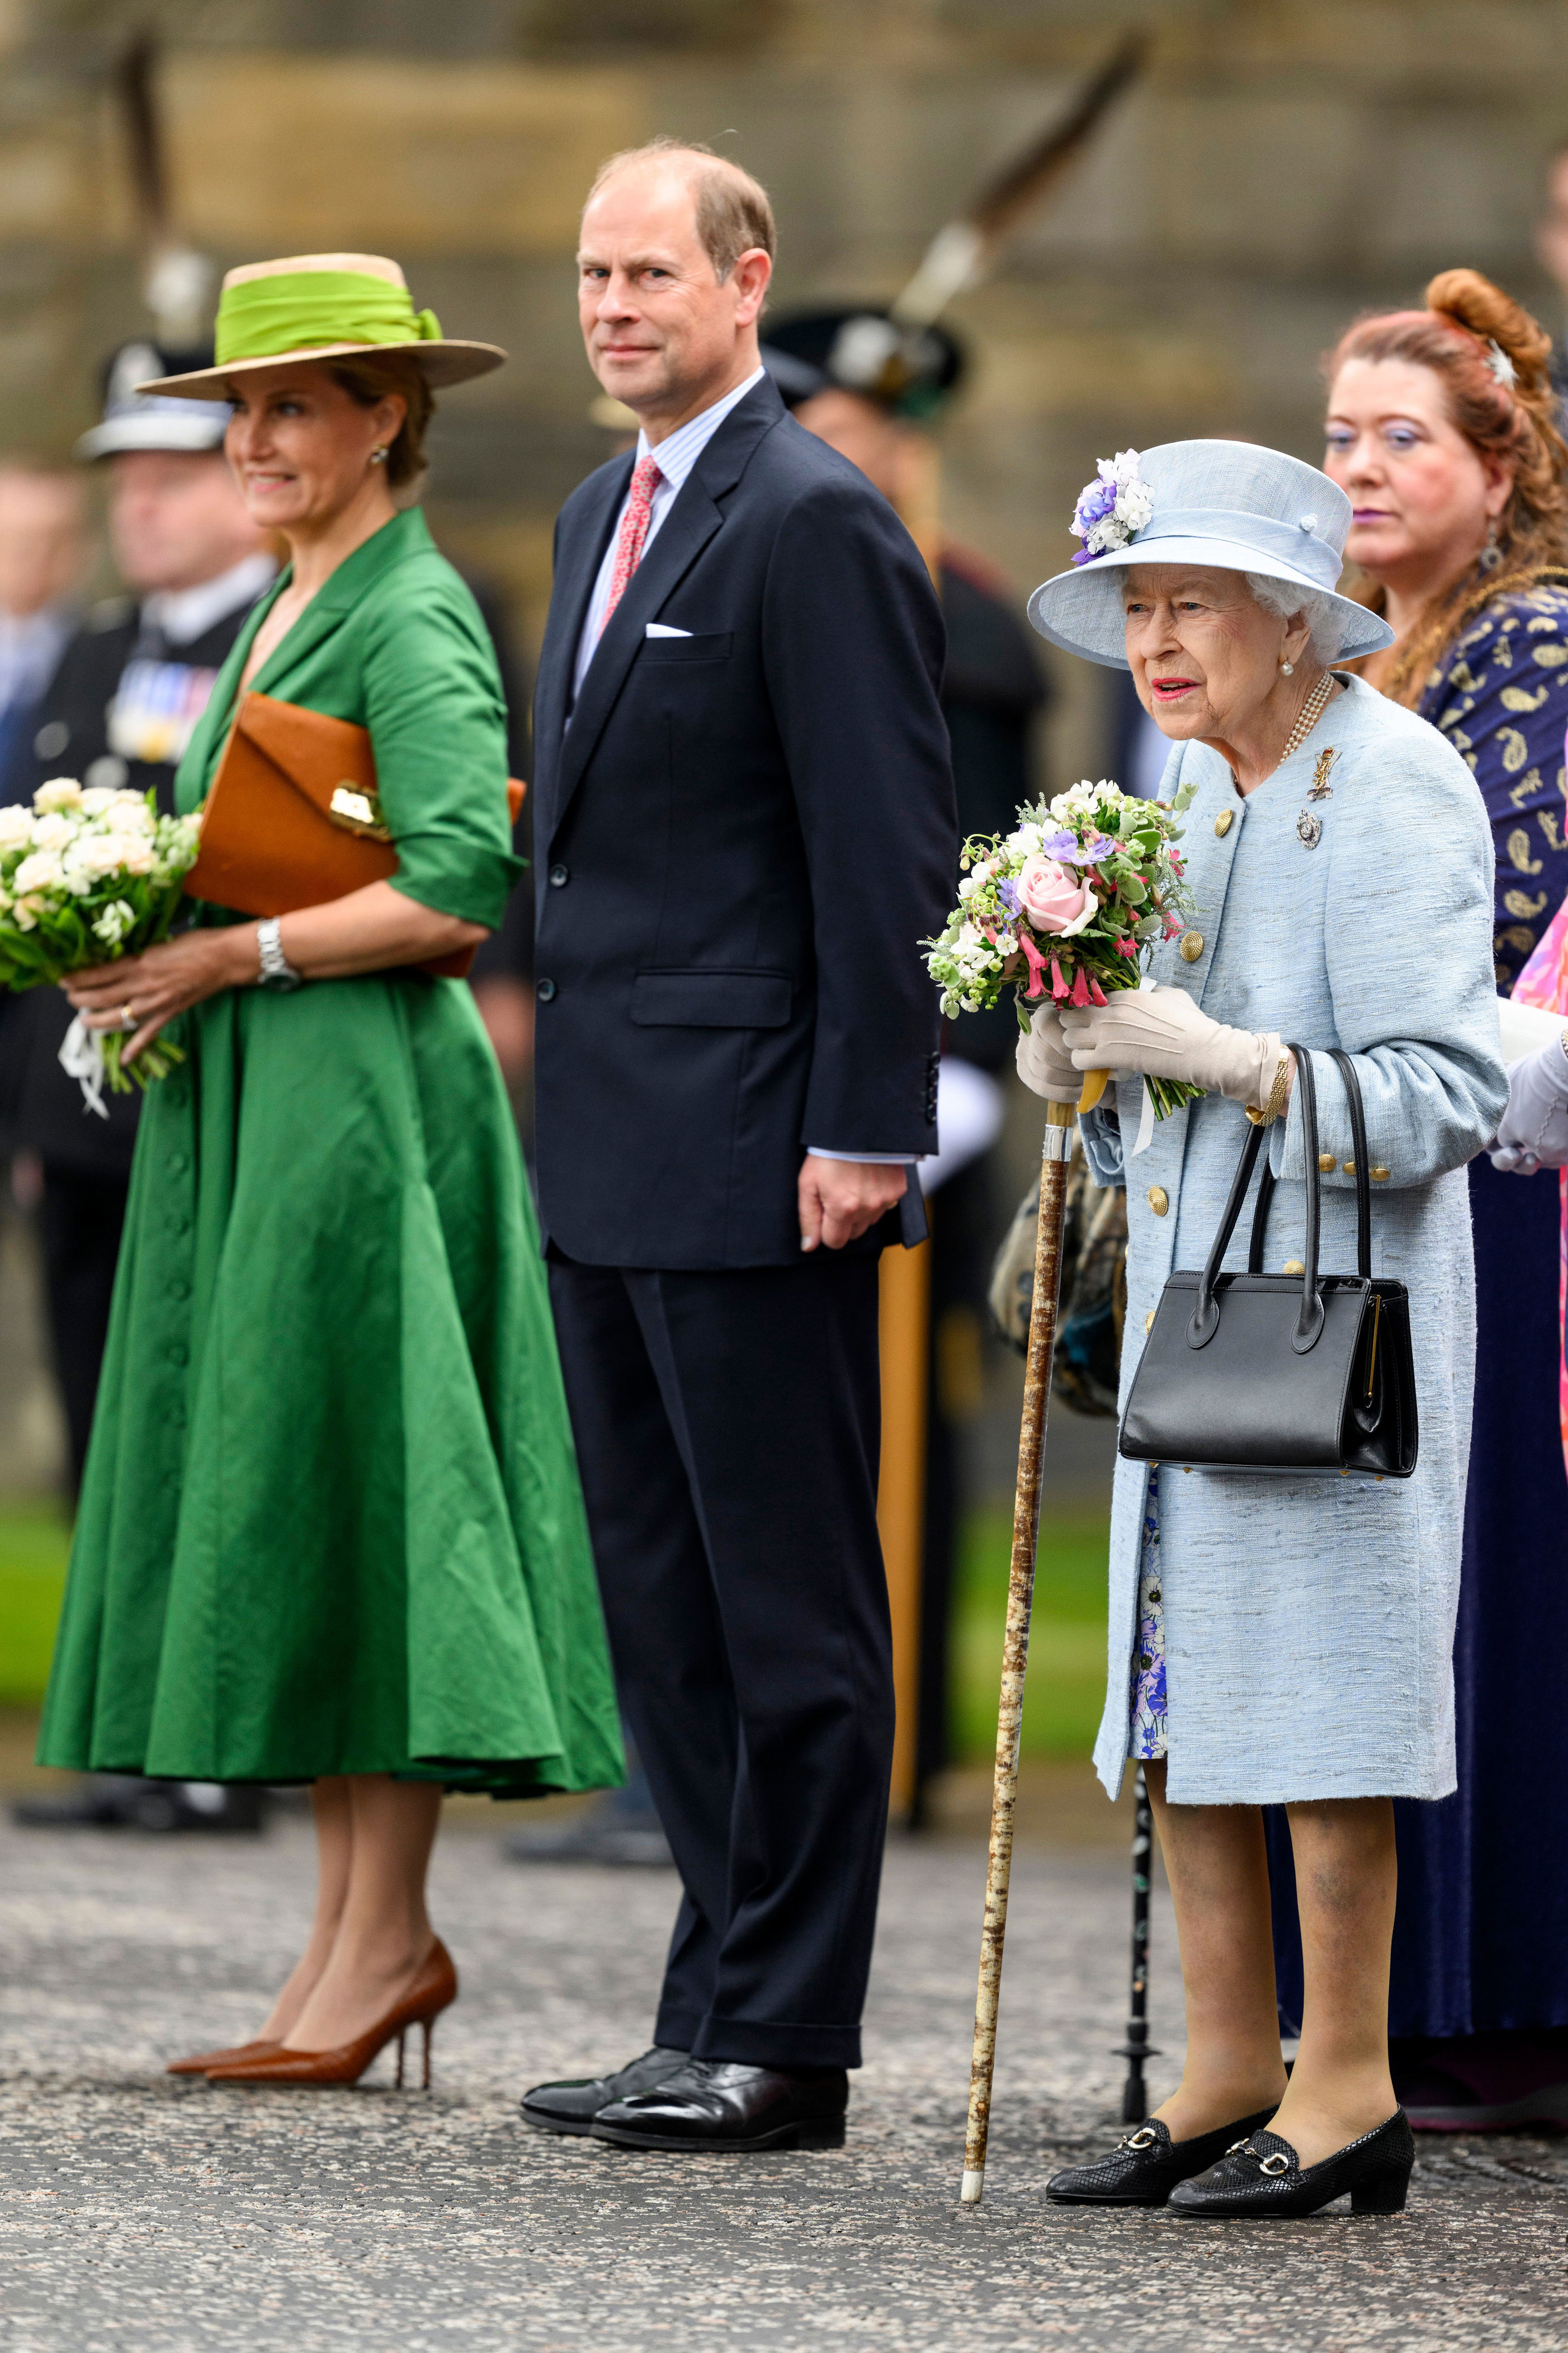 <p>Queen Elizabeth II was joined by son Prince Edward and his wife, Sophie, Countess of Wessex, at the Ceremony of the Keys at the Palace of Holyroodhouse during Holyrood Week in Edinburgh, Scotland, on June 27, 2022.</p>